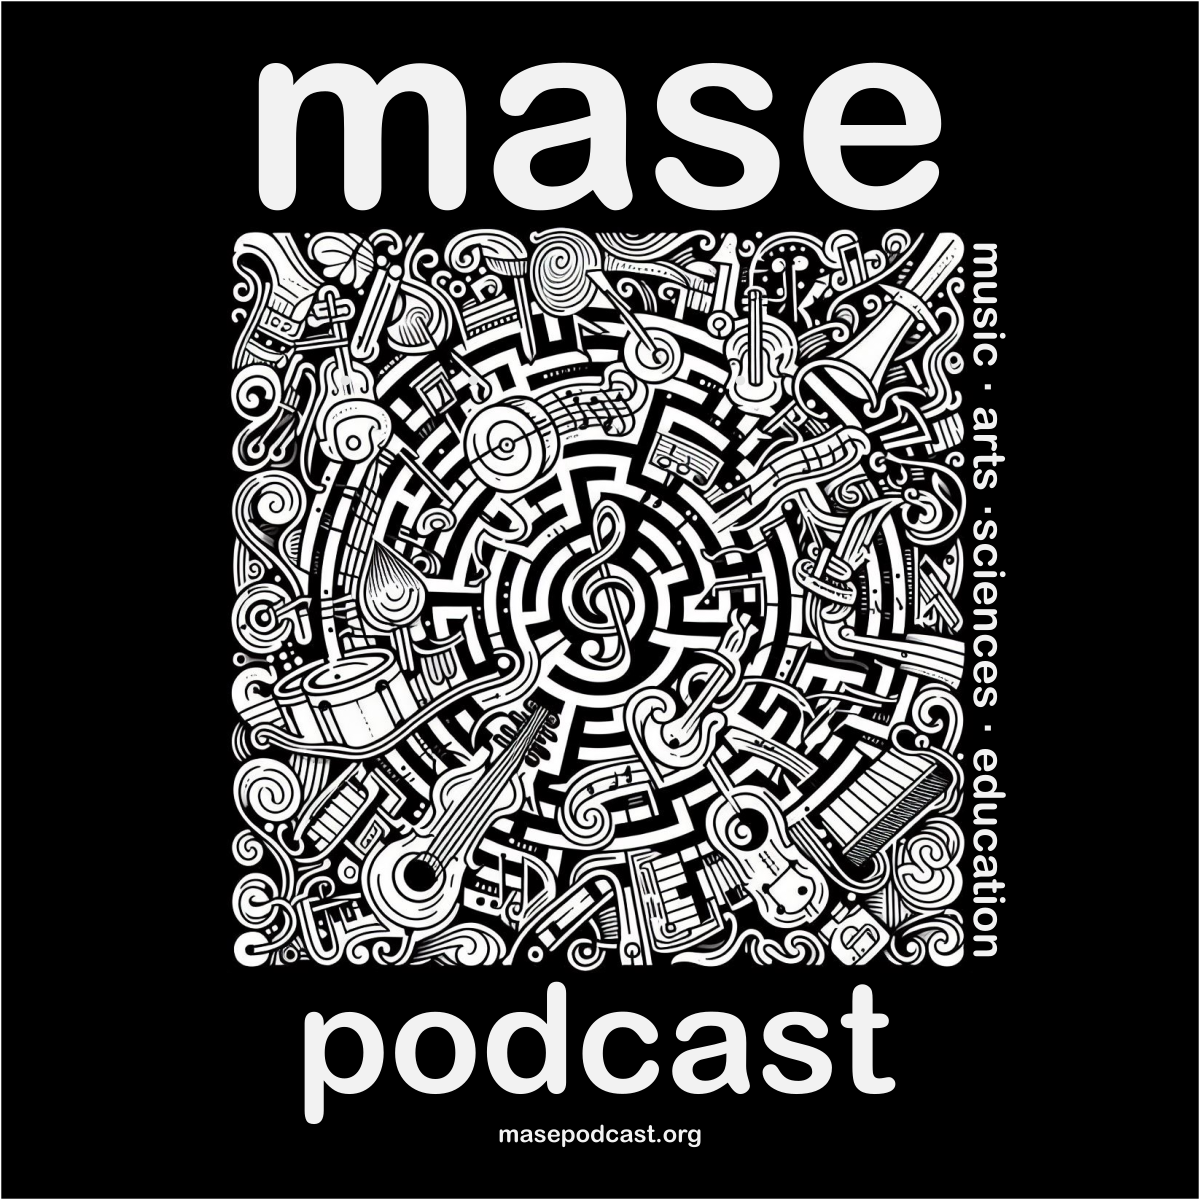 the official MASE podcast logo